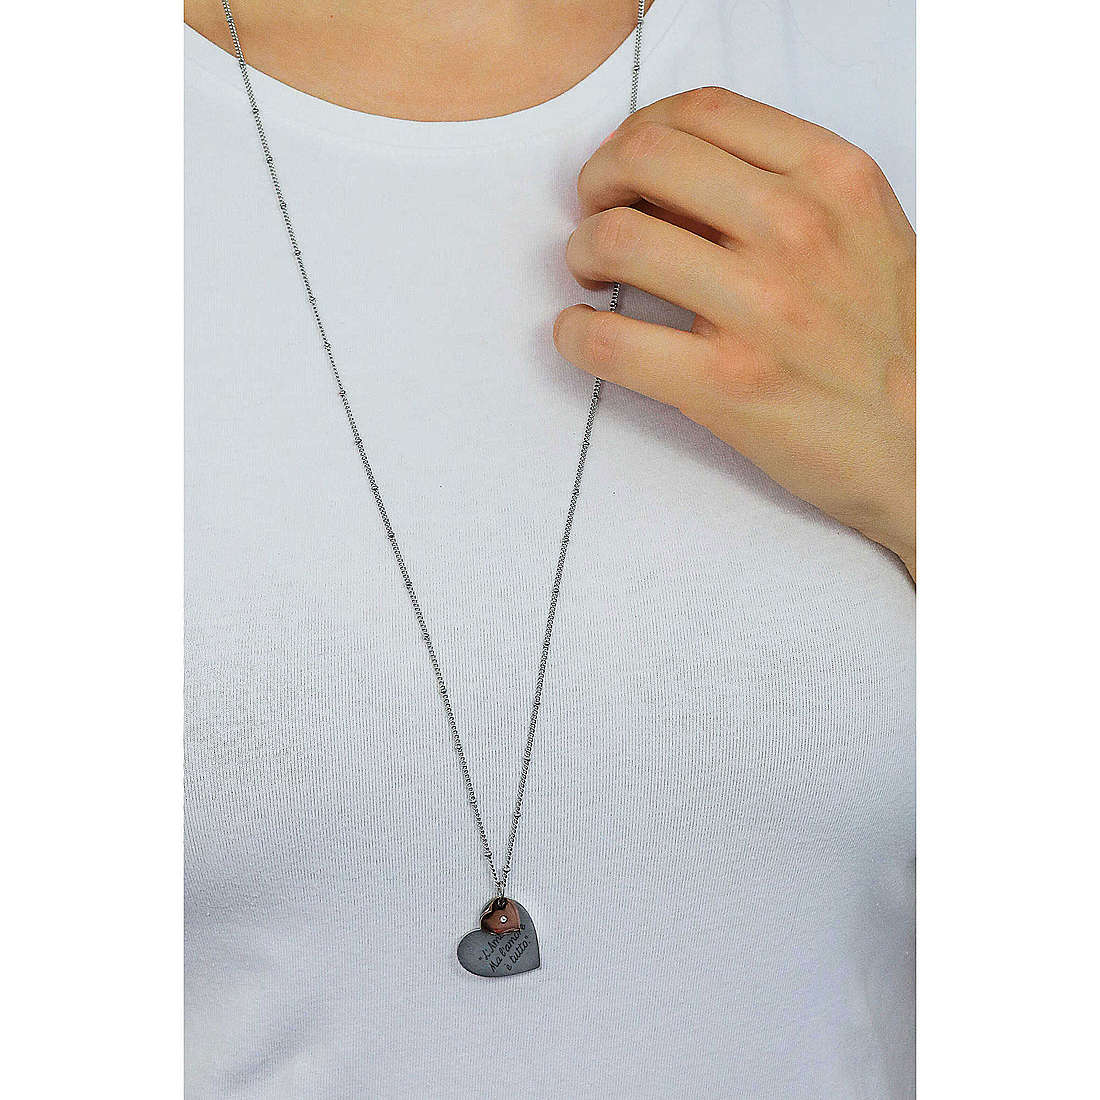 Kidult necklaces Love woman 751203 wearing